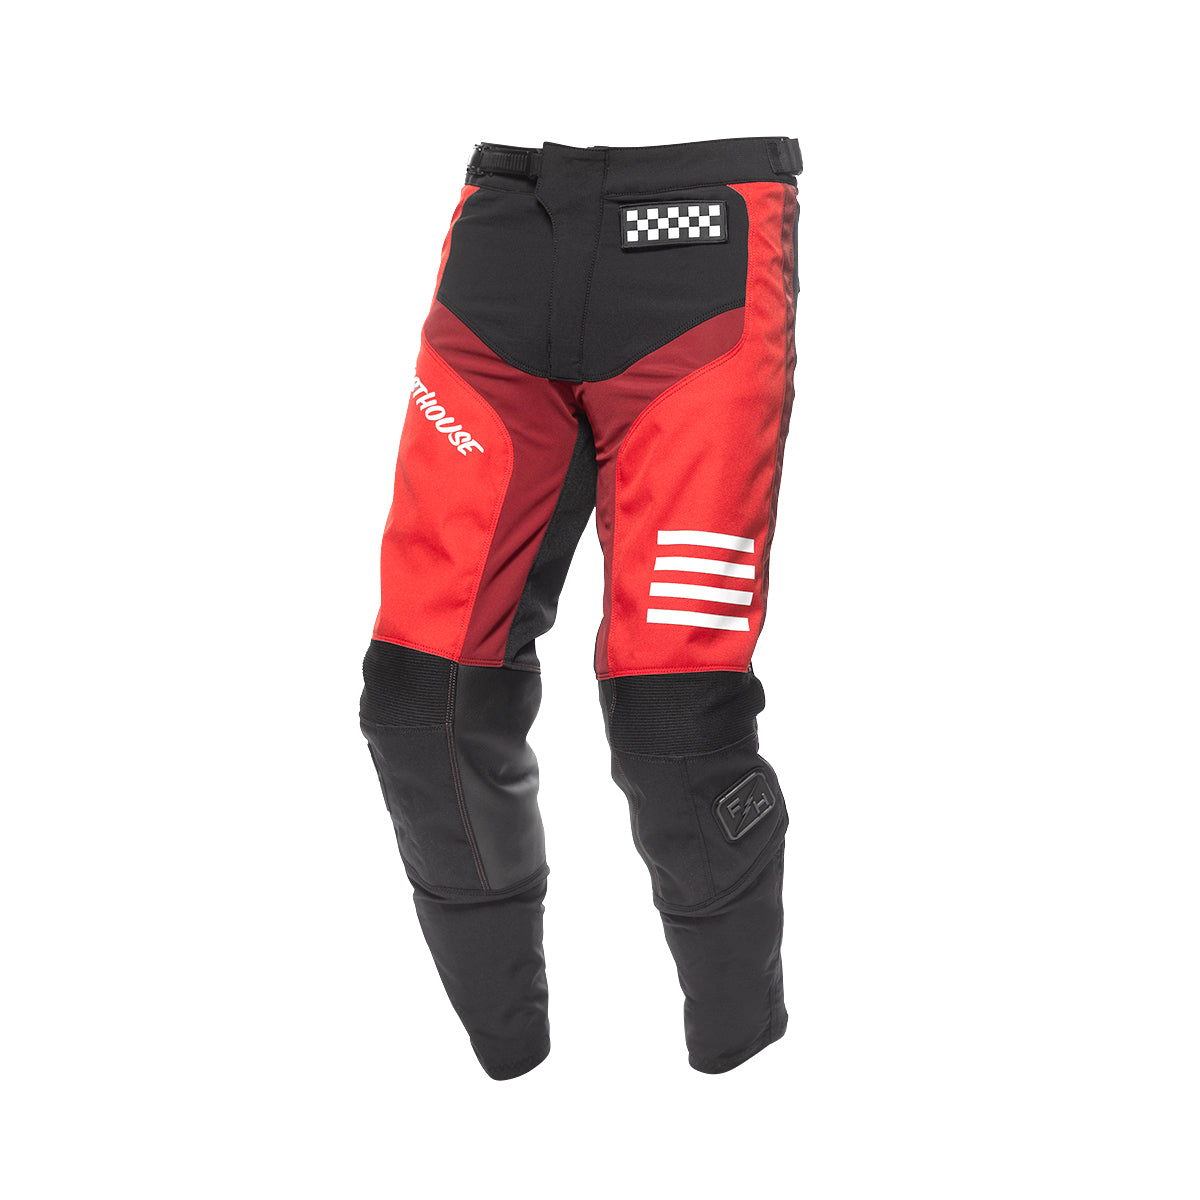 Grindhouse Mod Youth Pant - Red/Black